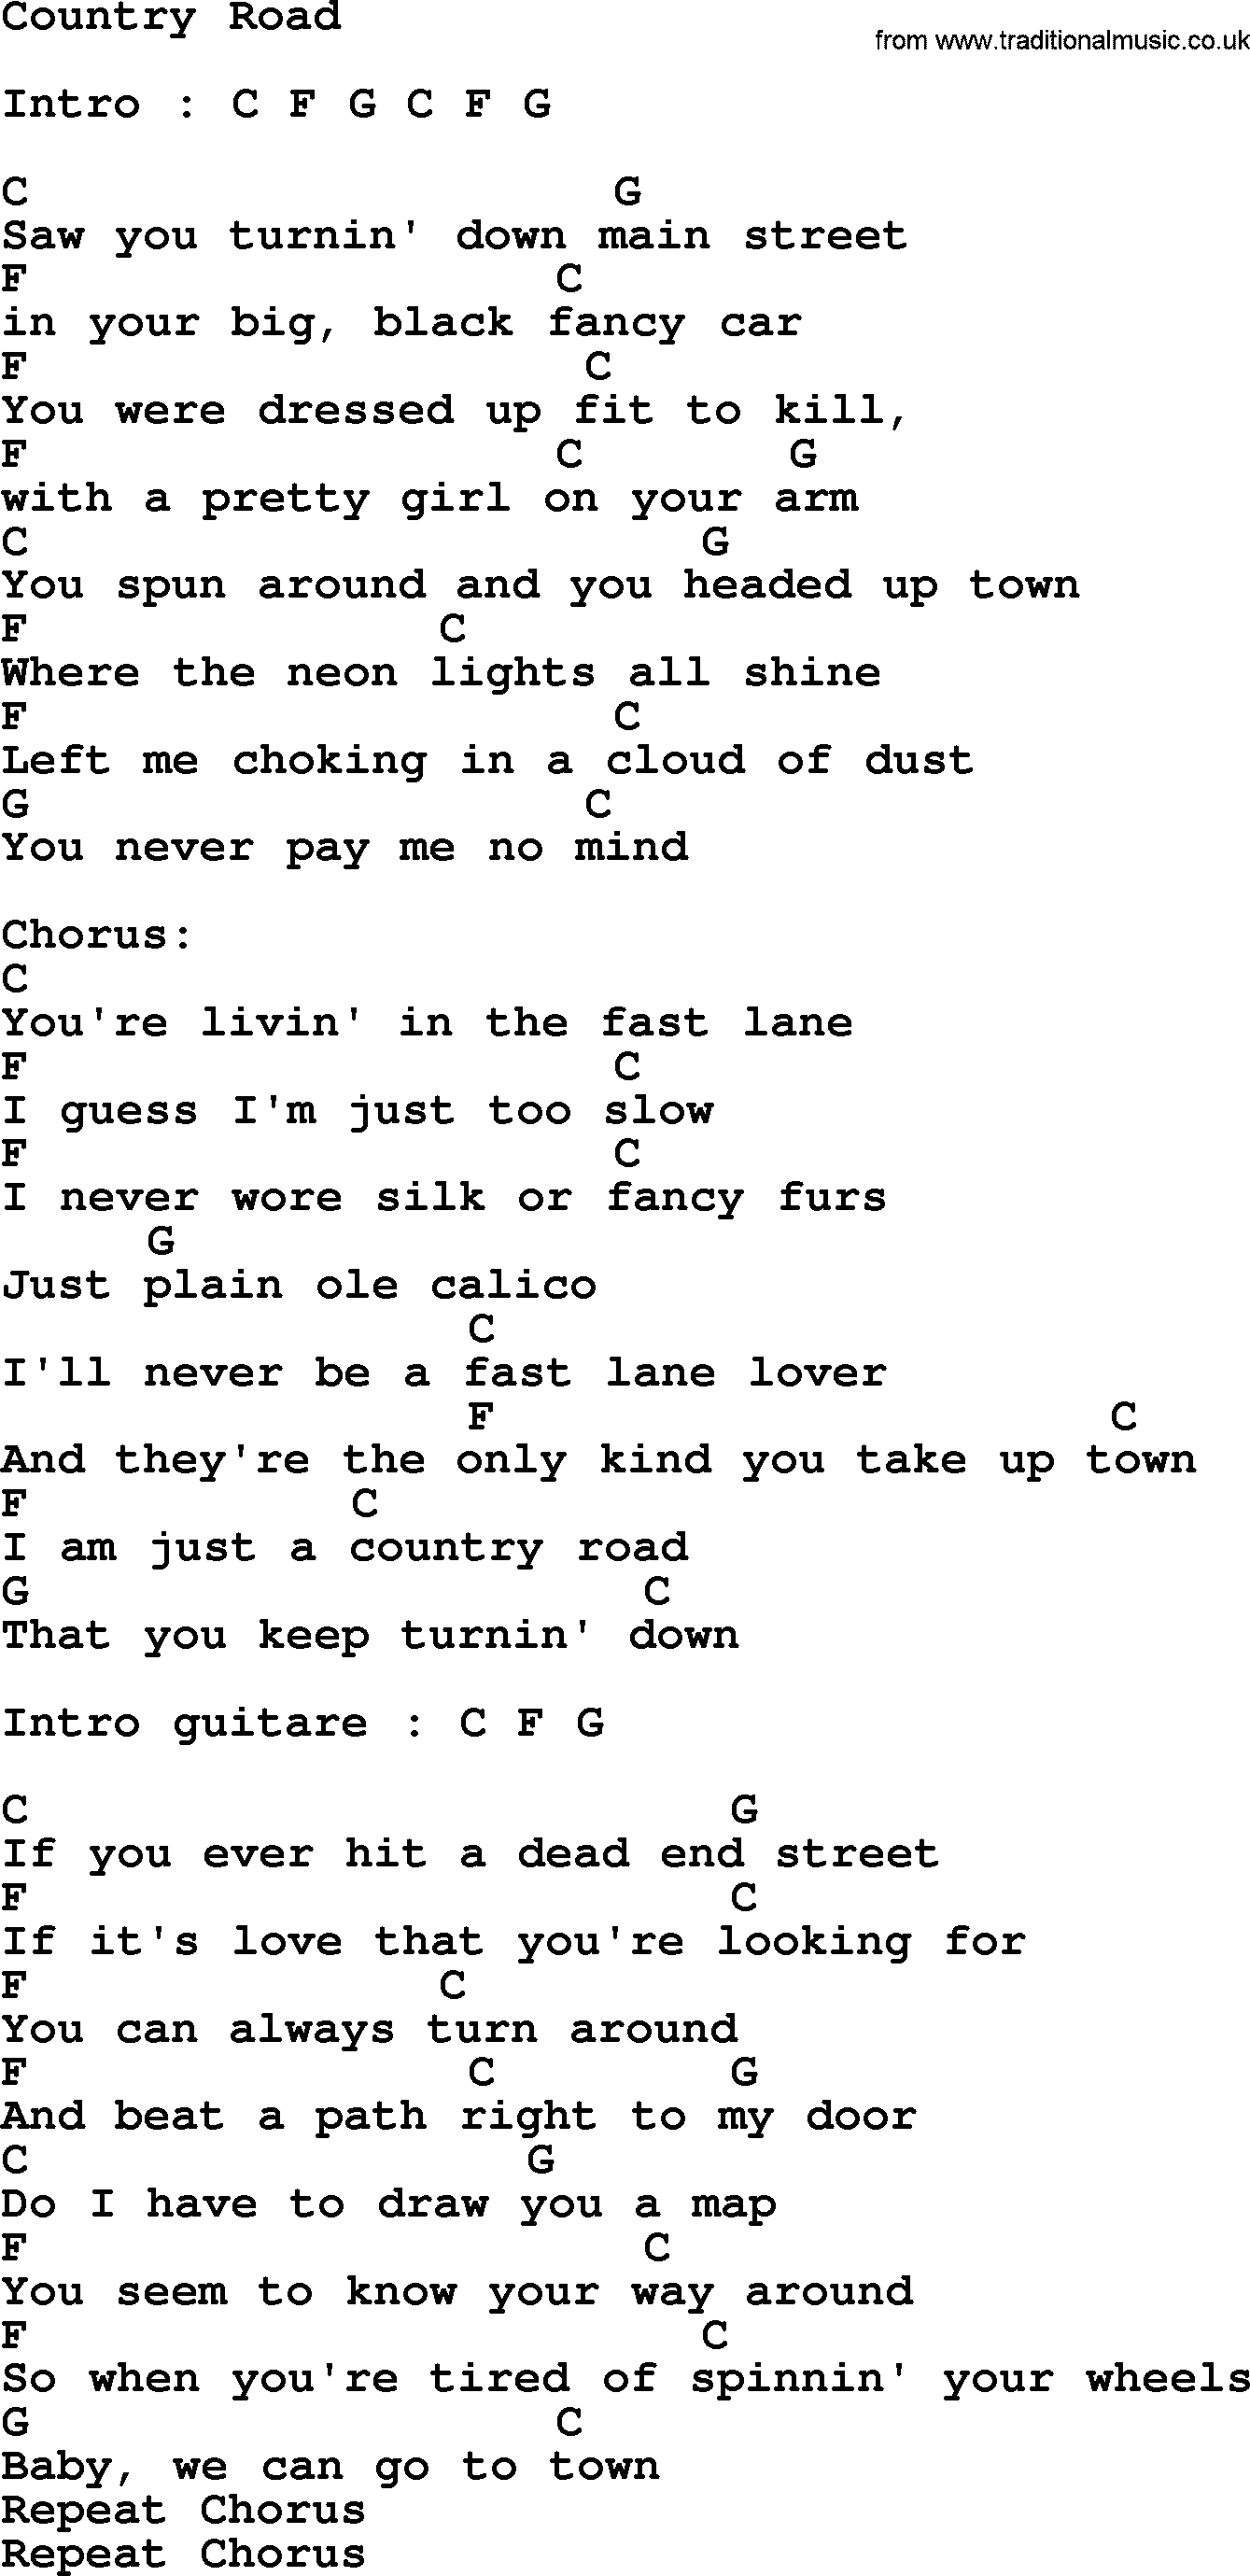 Country Roads Chords Dolly Parton Song Country Road Lyrics And Chords